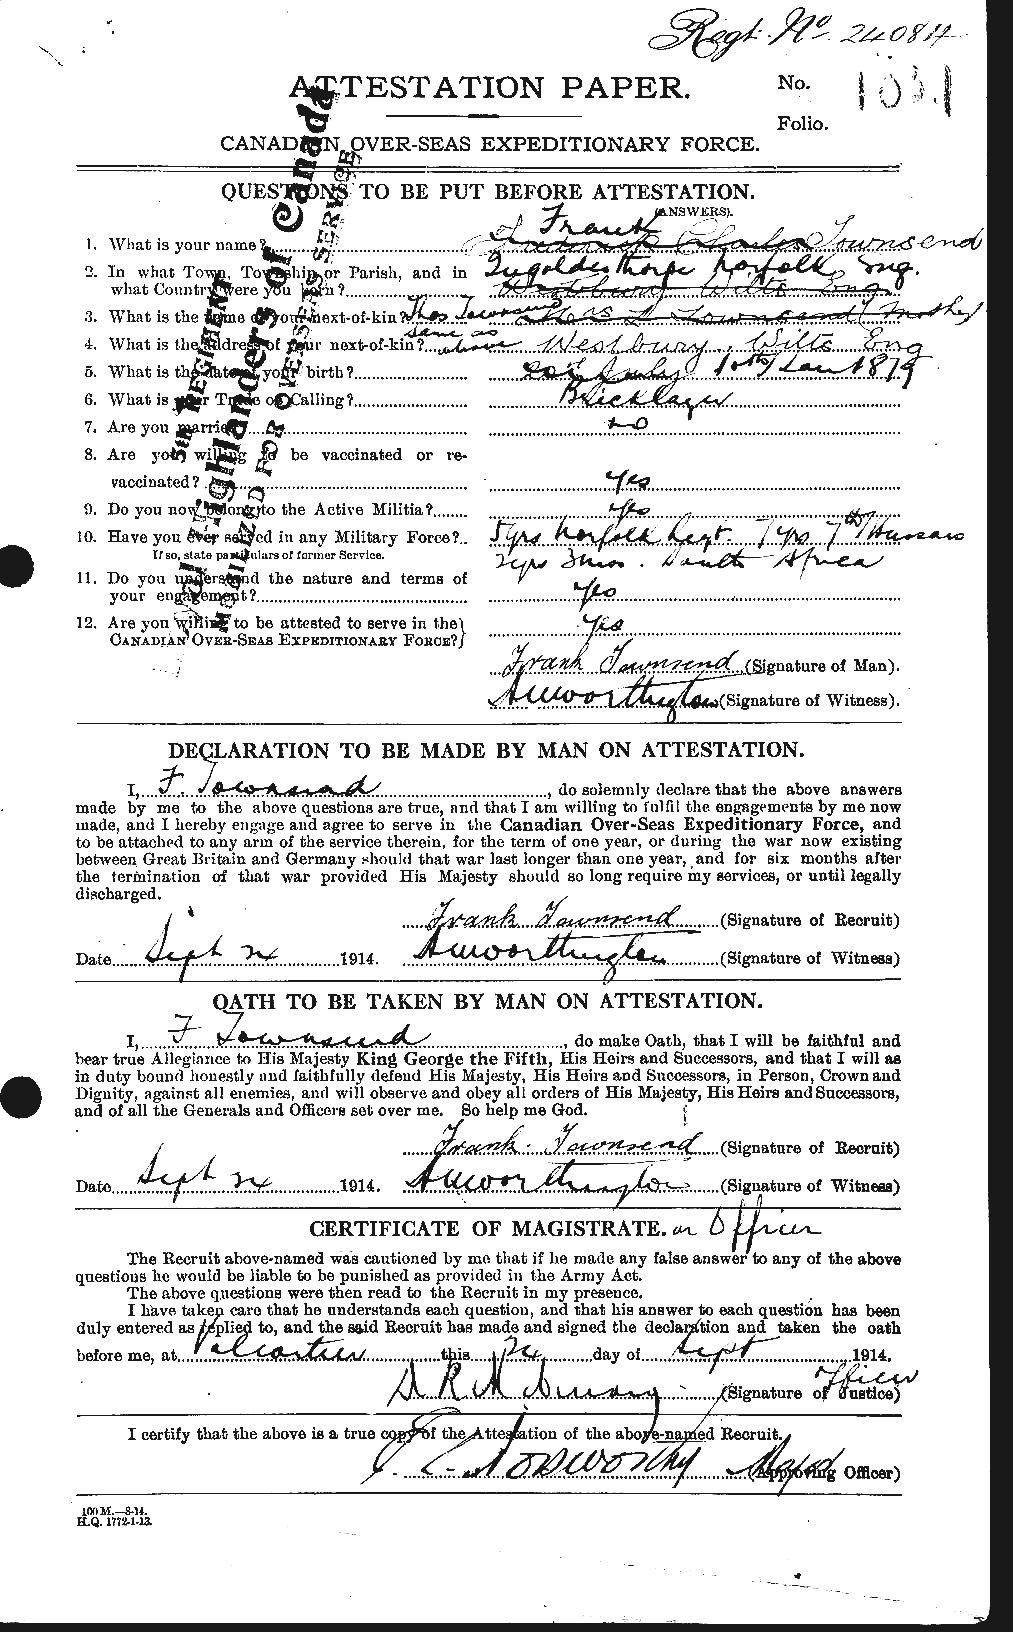 Personnel Records of the First World War - CEF 636420a